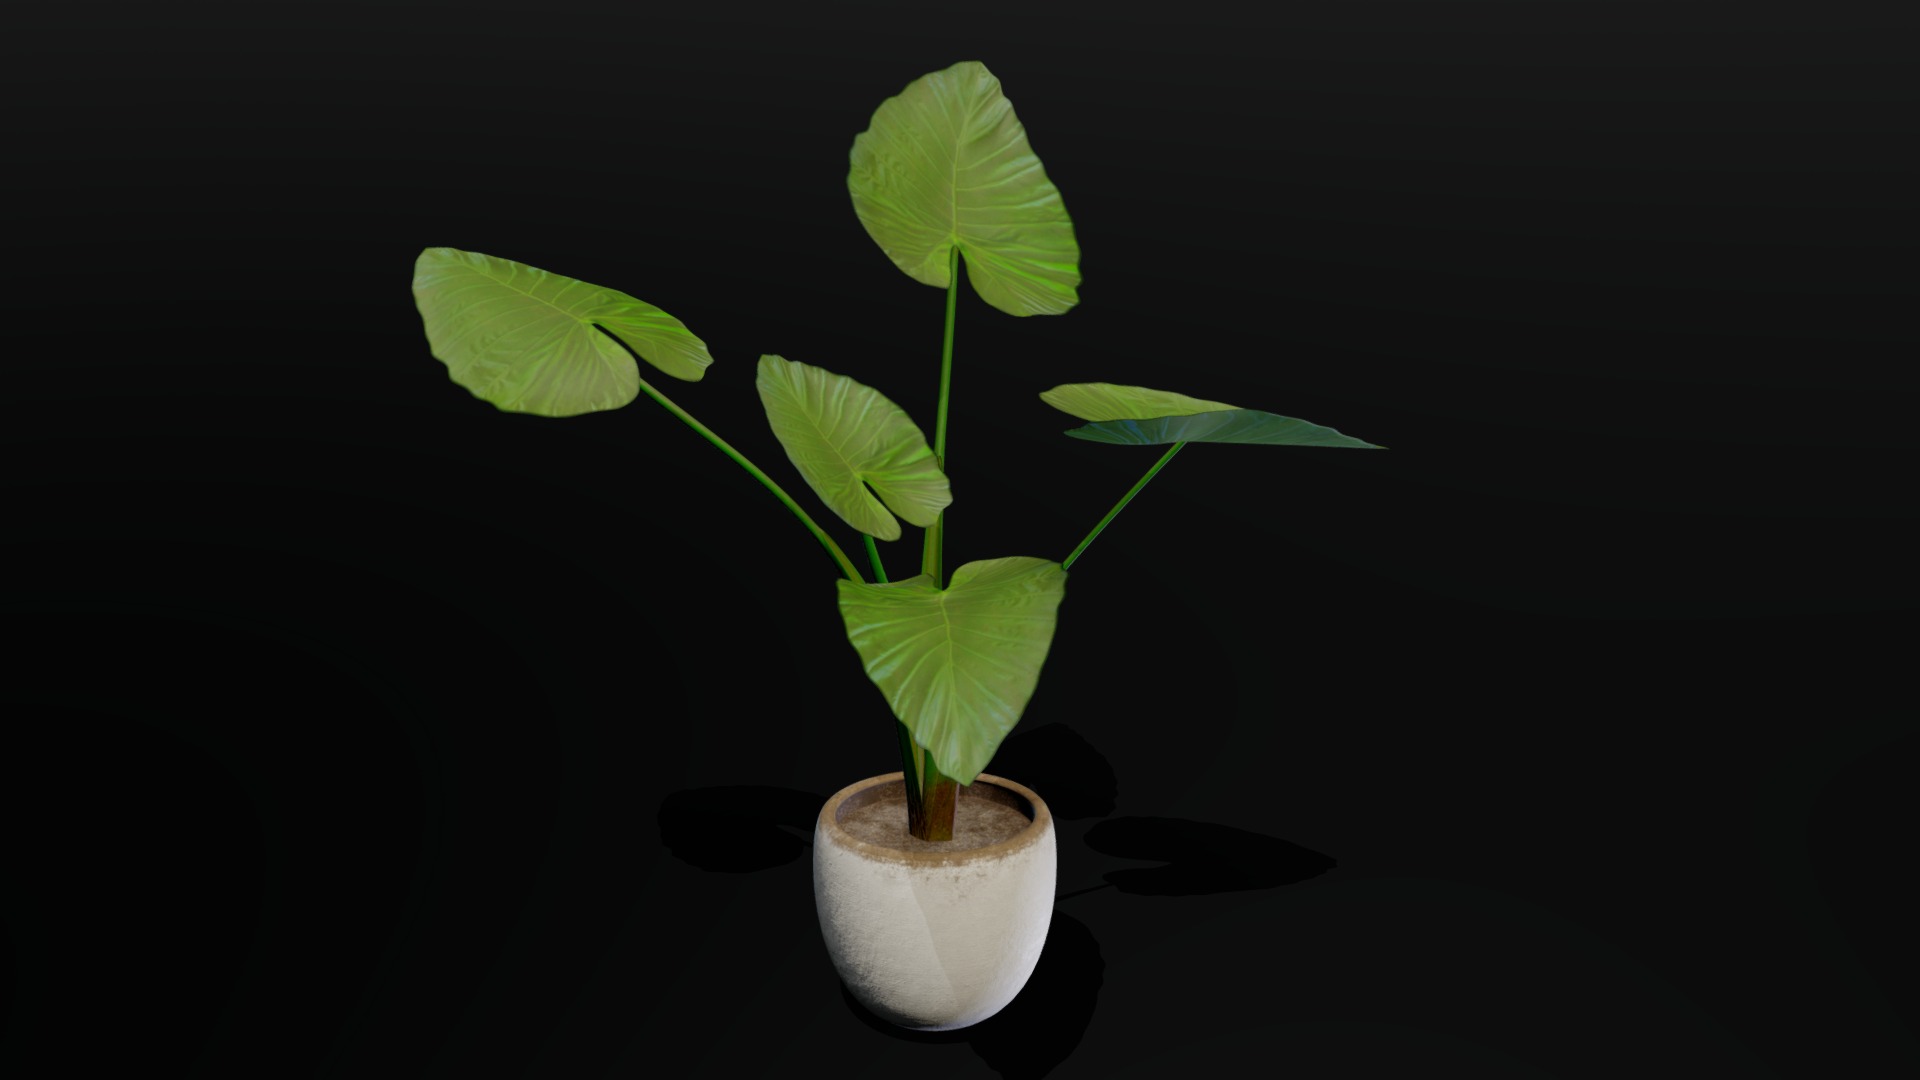 3D model Indoor plant / Alocasia wentii in concrete pot - This is a 3D model of the Indoor plant / Alocasia wentii in concrete pot. The 3D model is about a plant in a pot.